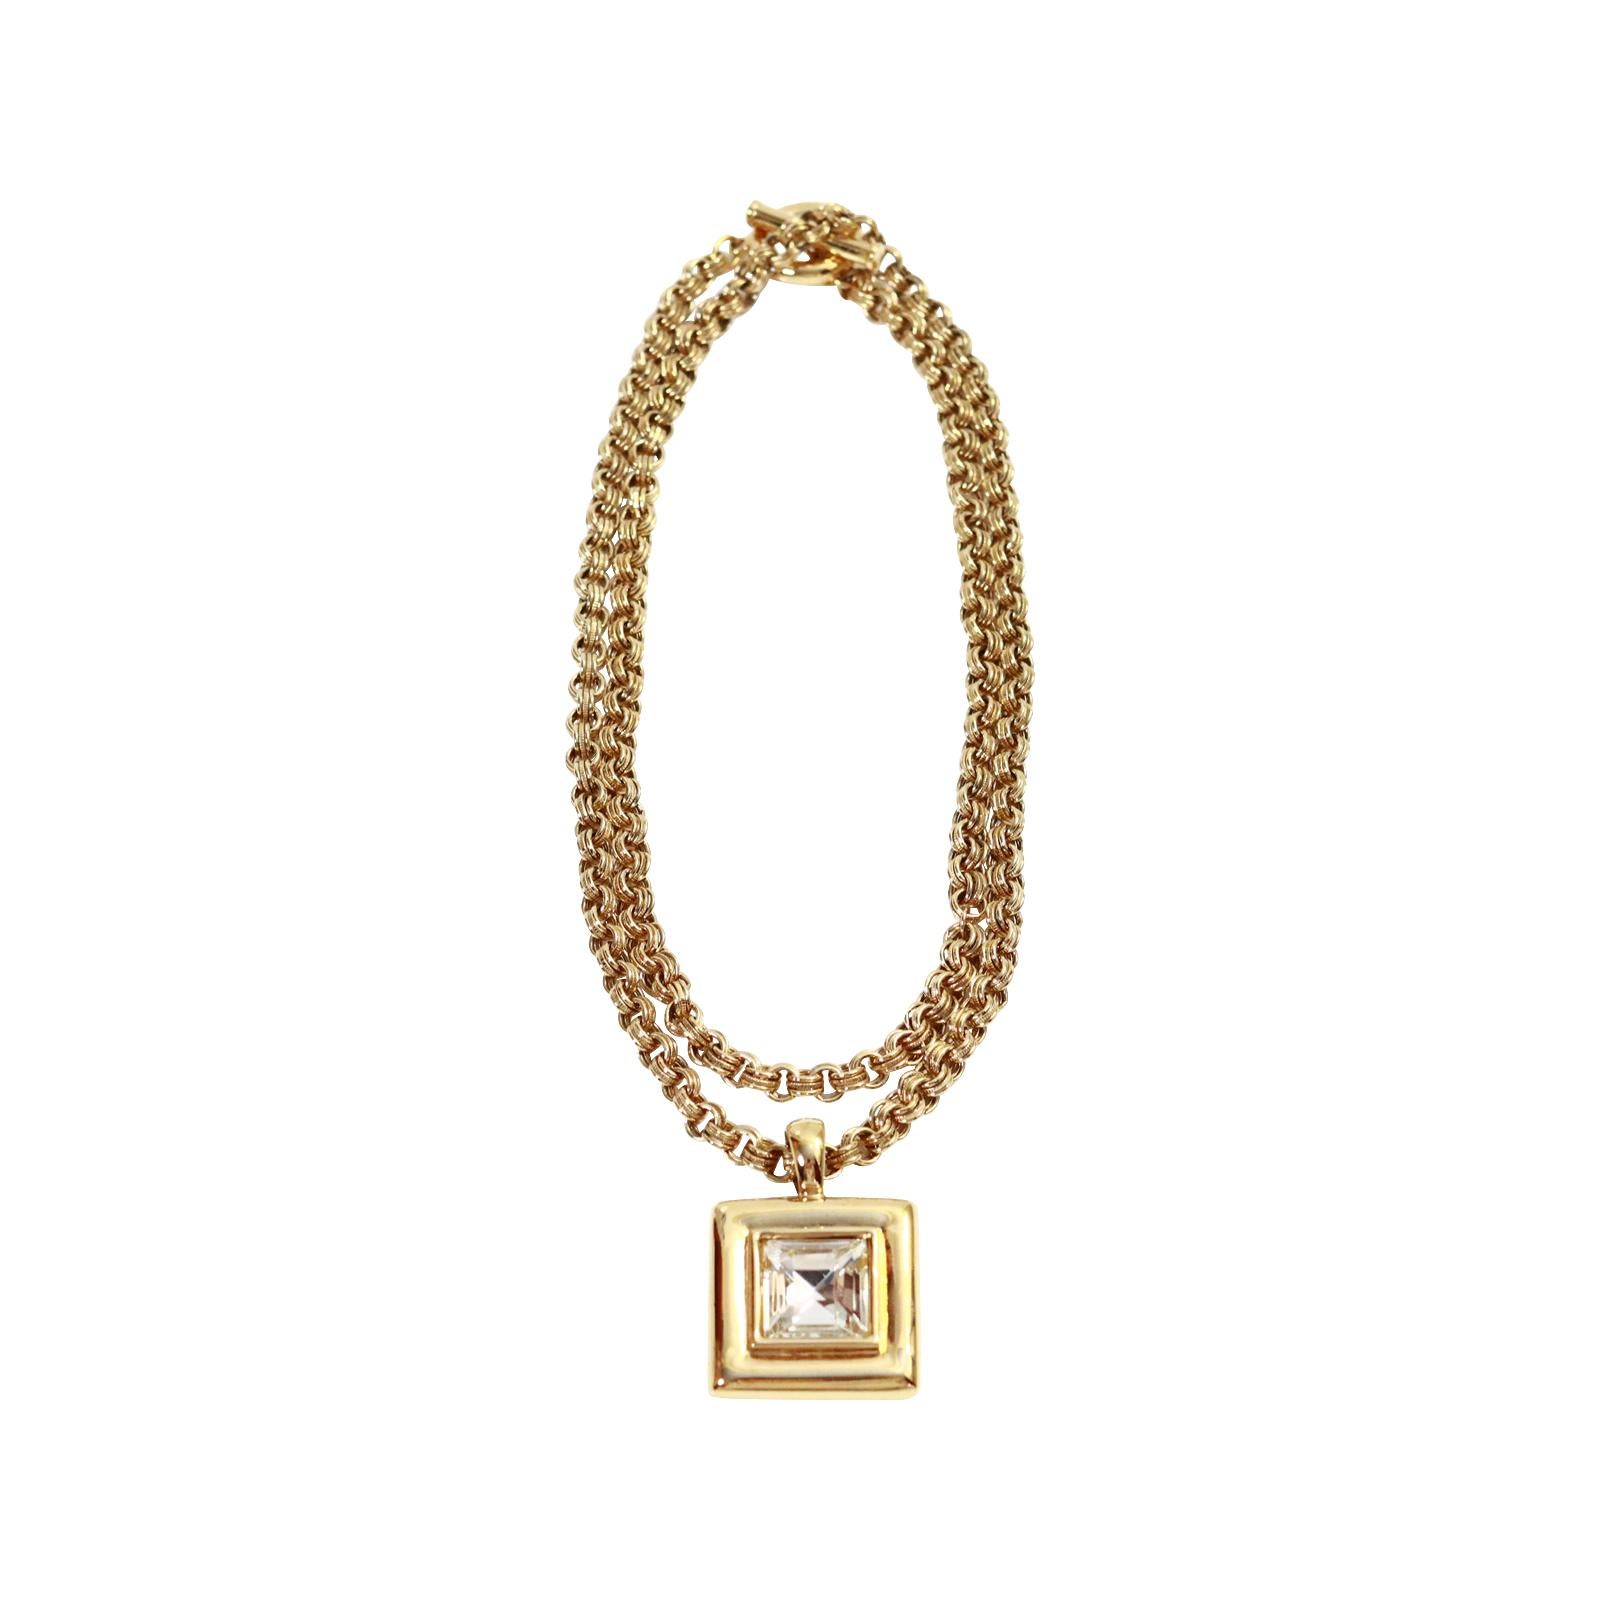 Vintage Givenchy Link Chain with Dangling Drop Necklace Circa 1980s In Good Condition For Sale In New York, NY